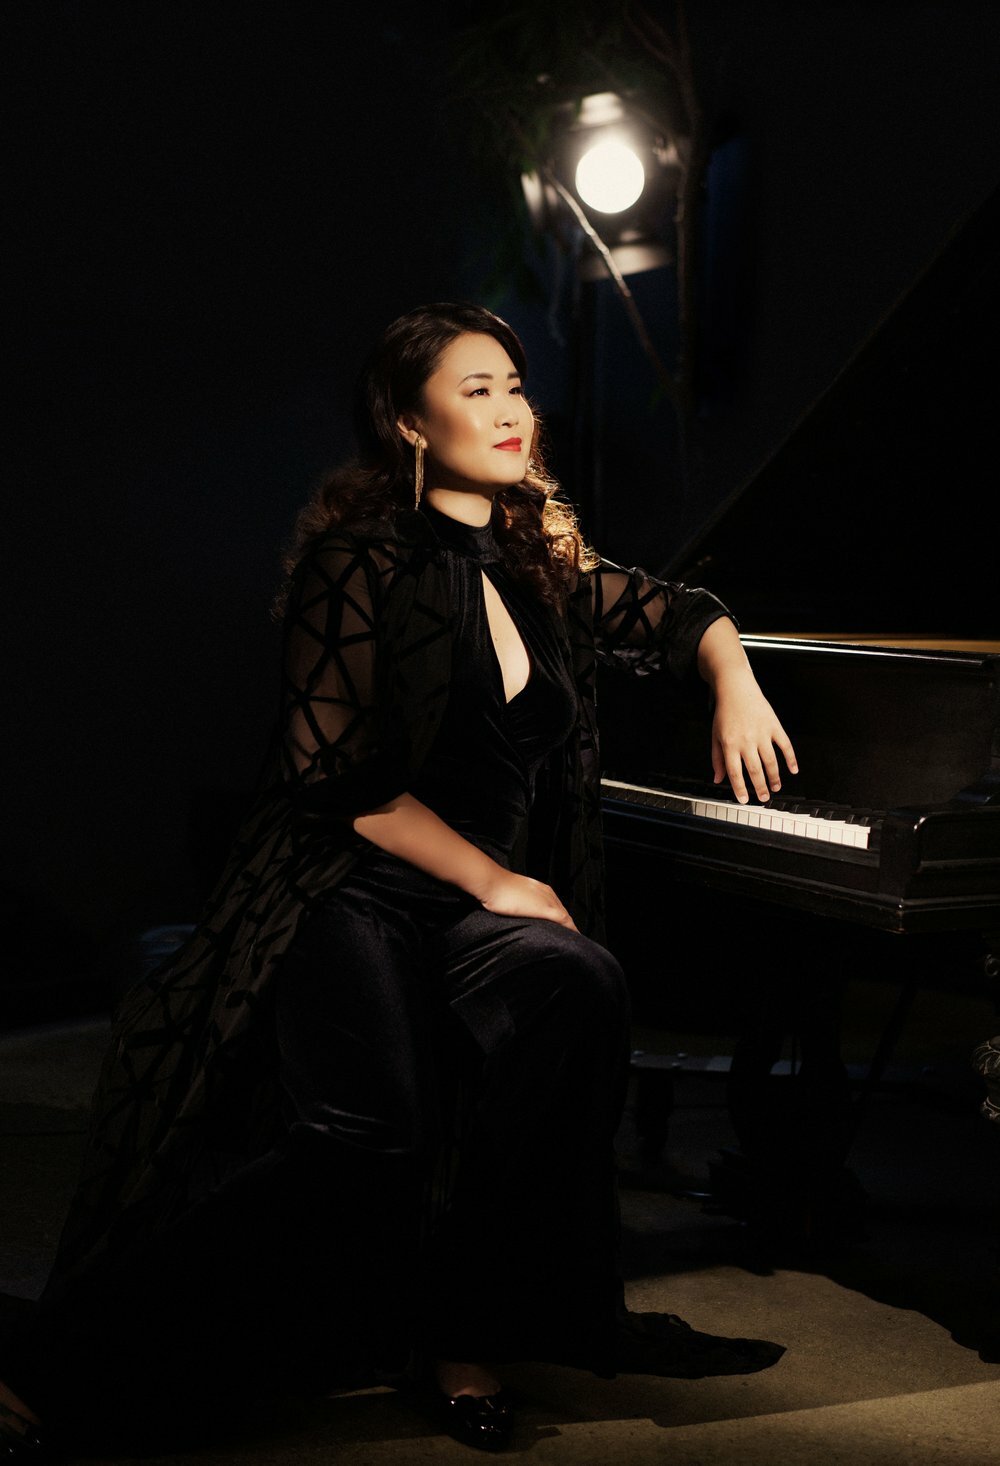 Saturday’s special guest artist pianist is Tianhong Yang. (Courtesy photos)